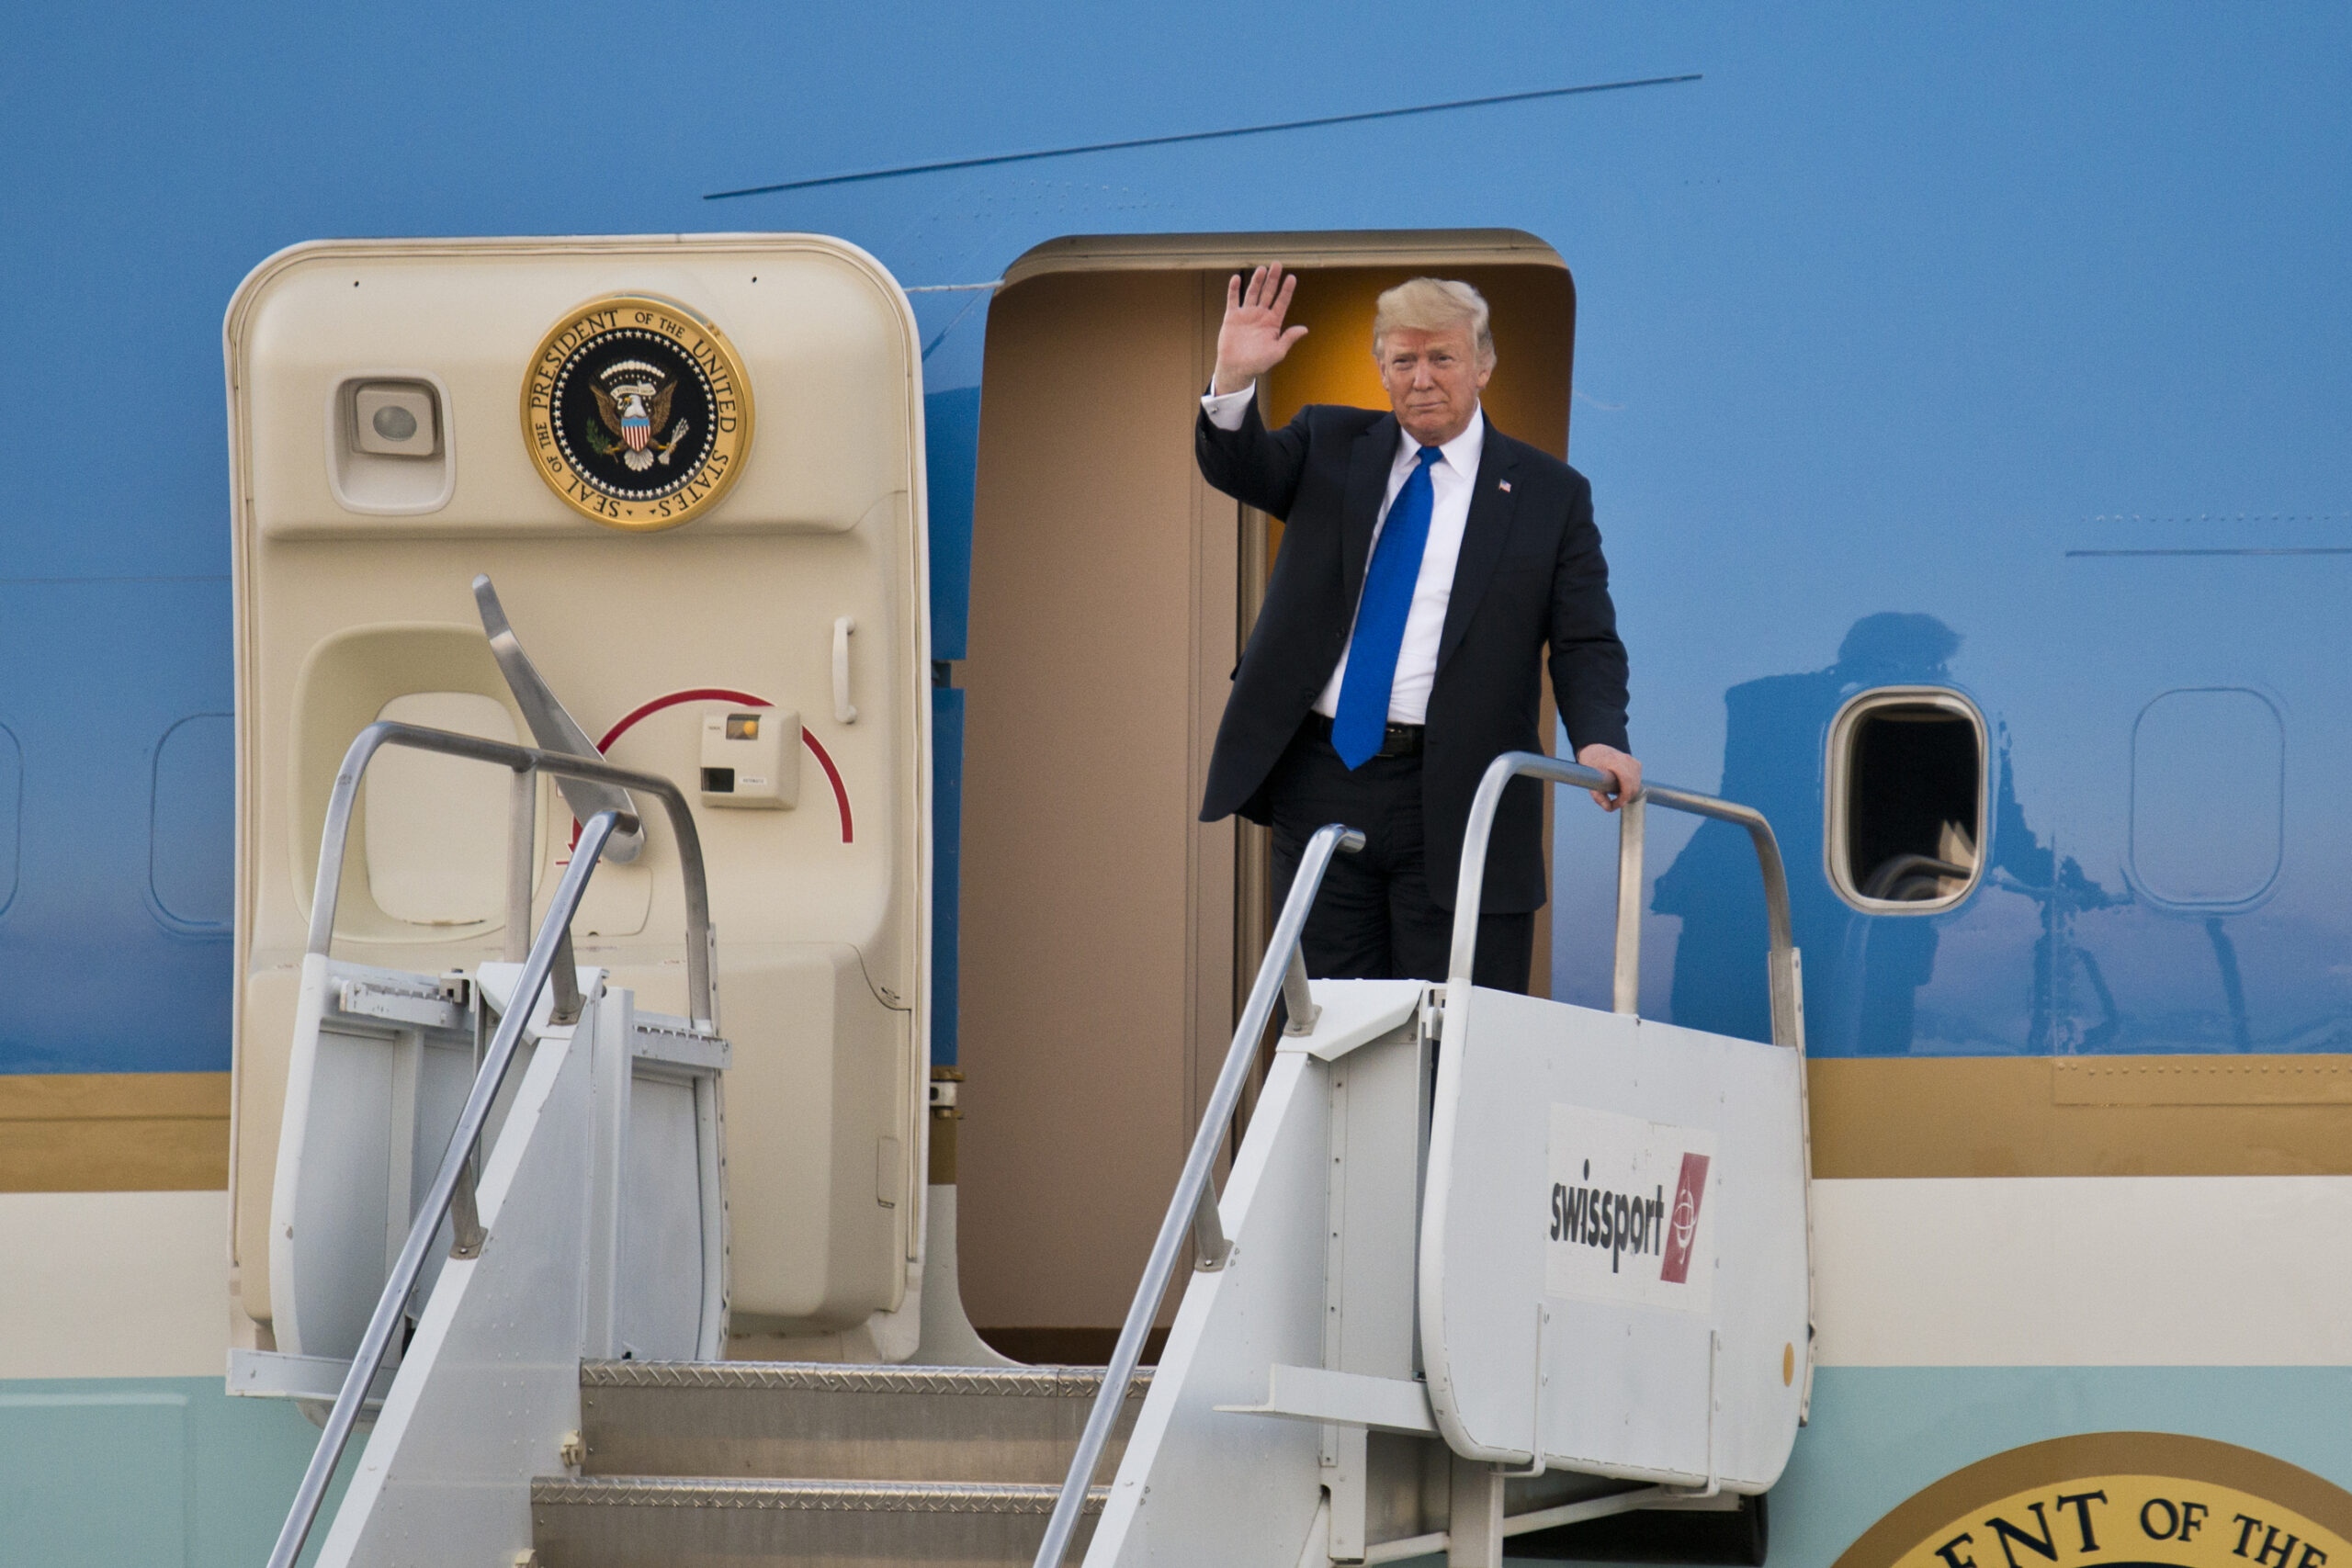 Trump waves from Air Force One